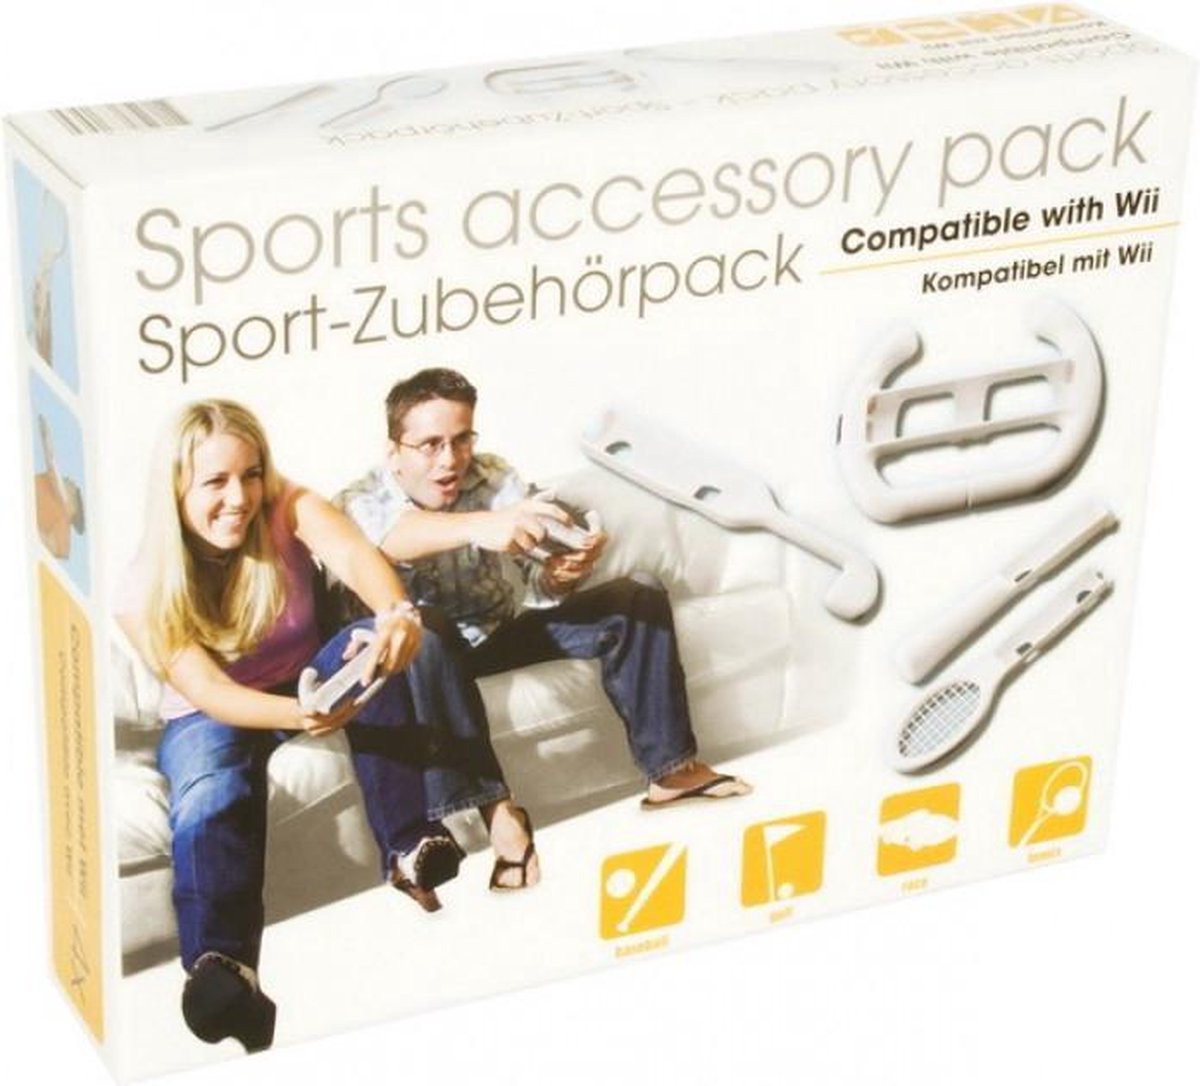 Wii Sports Accessory Pack [Complete] - Wii Hardware